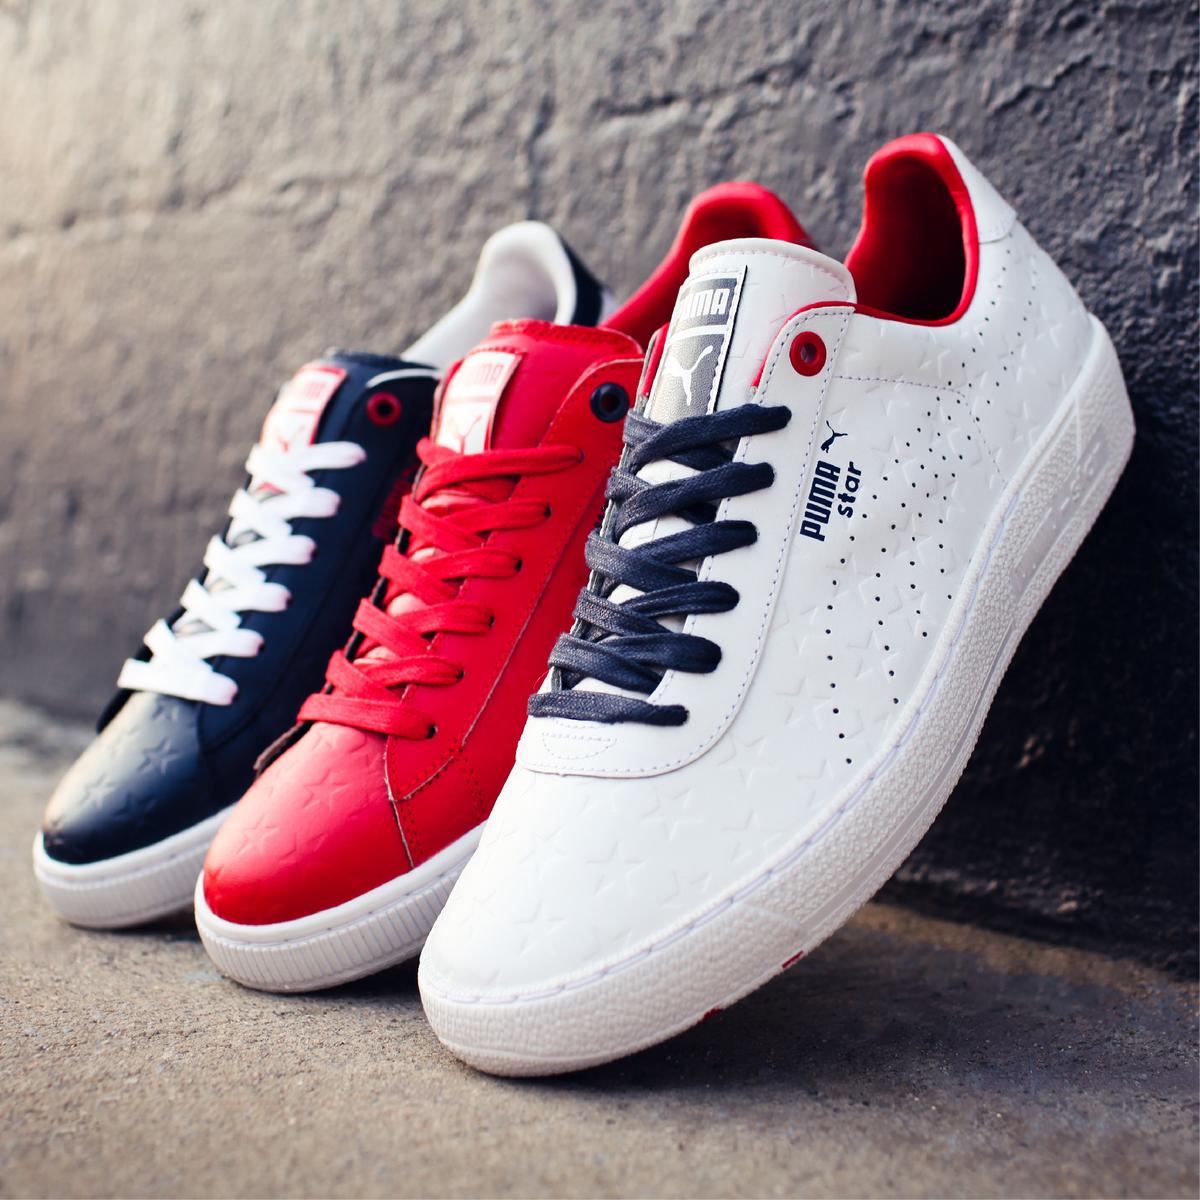 puma shoes 2015 collection off 56 